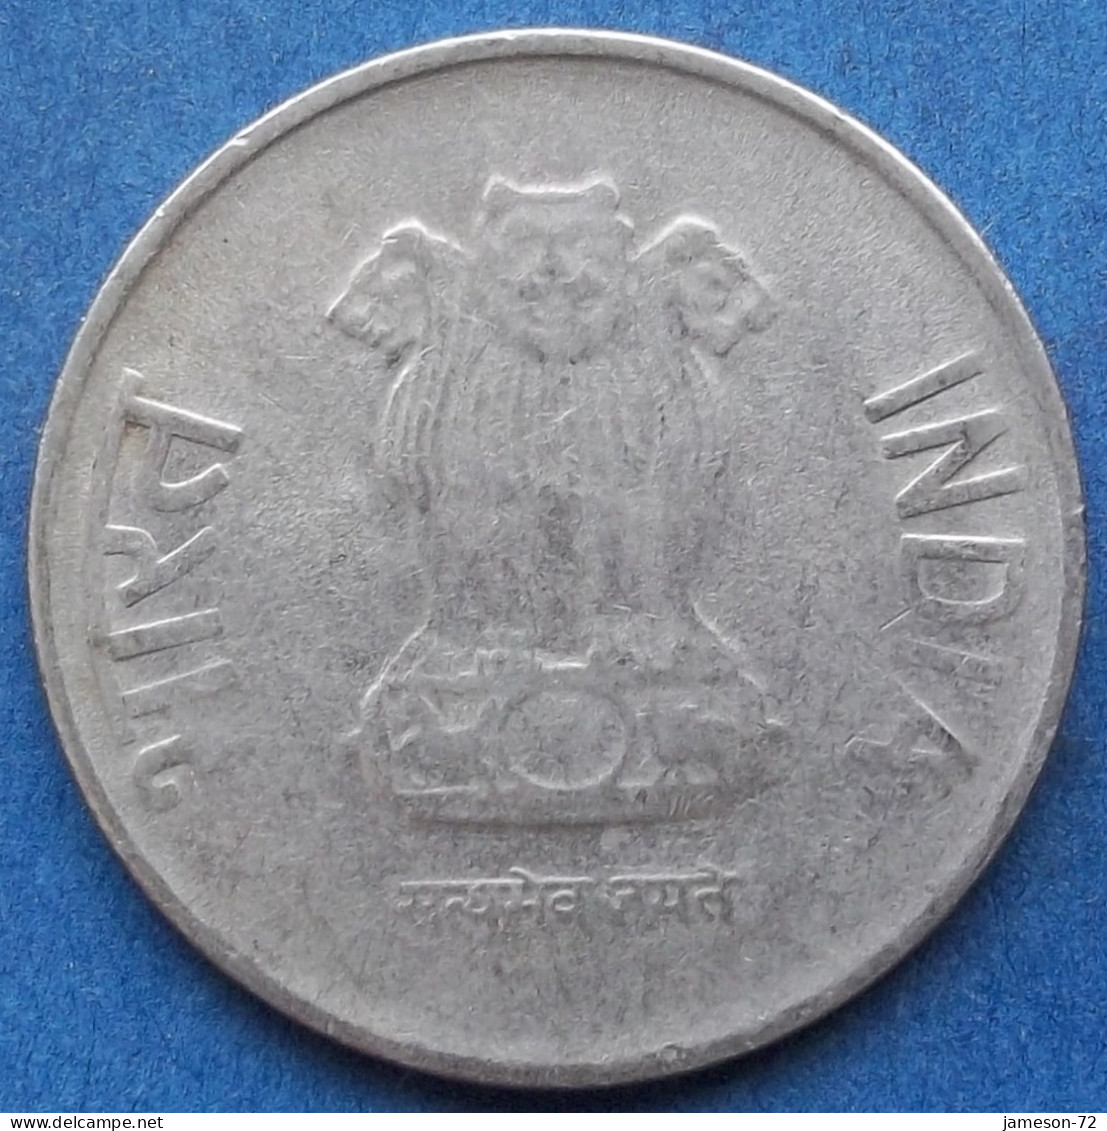 INDIA - 2 Rupees 2015 "Lotus Flowers" KM# 395 Republic Decimal Coinage (1957) - Edelweiss Coins - Georgië